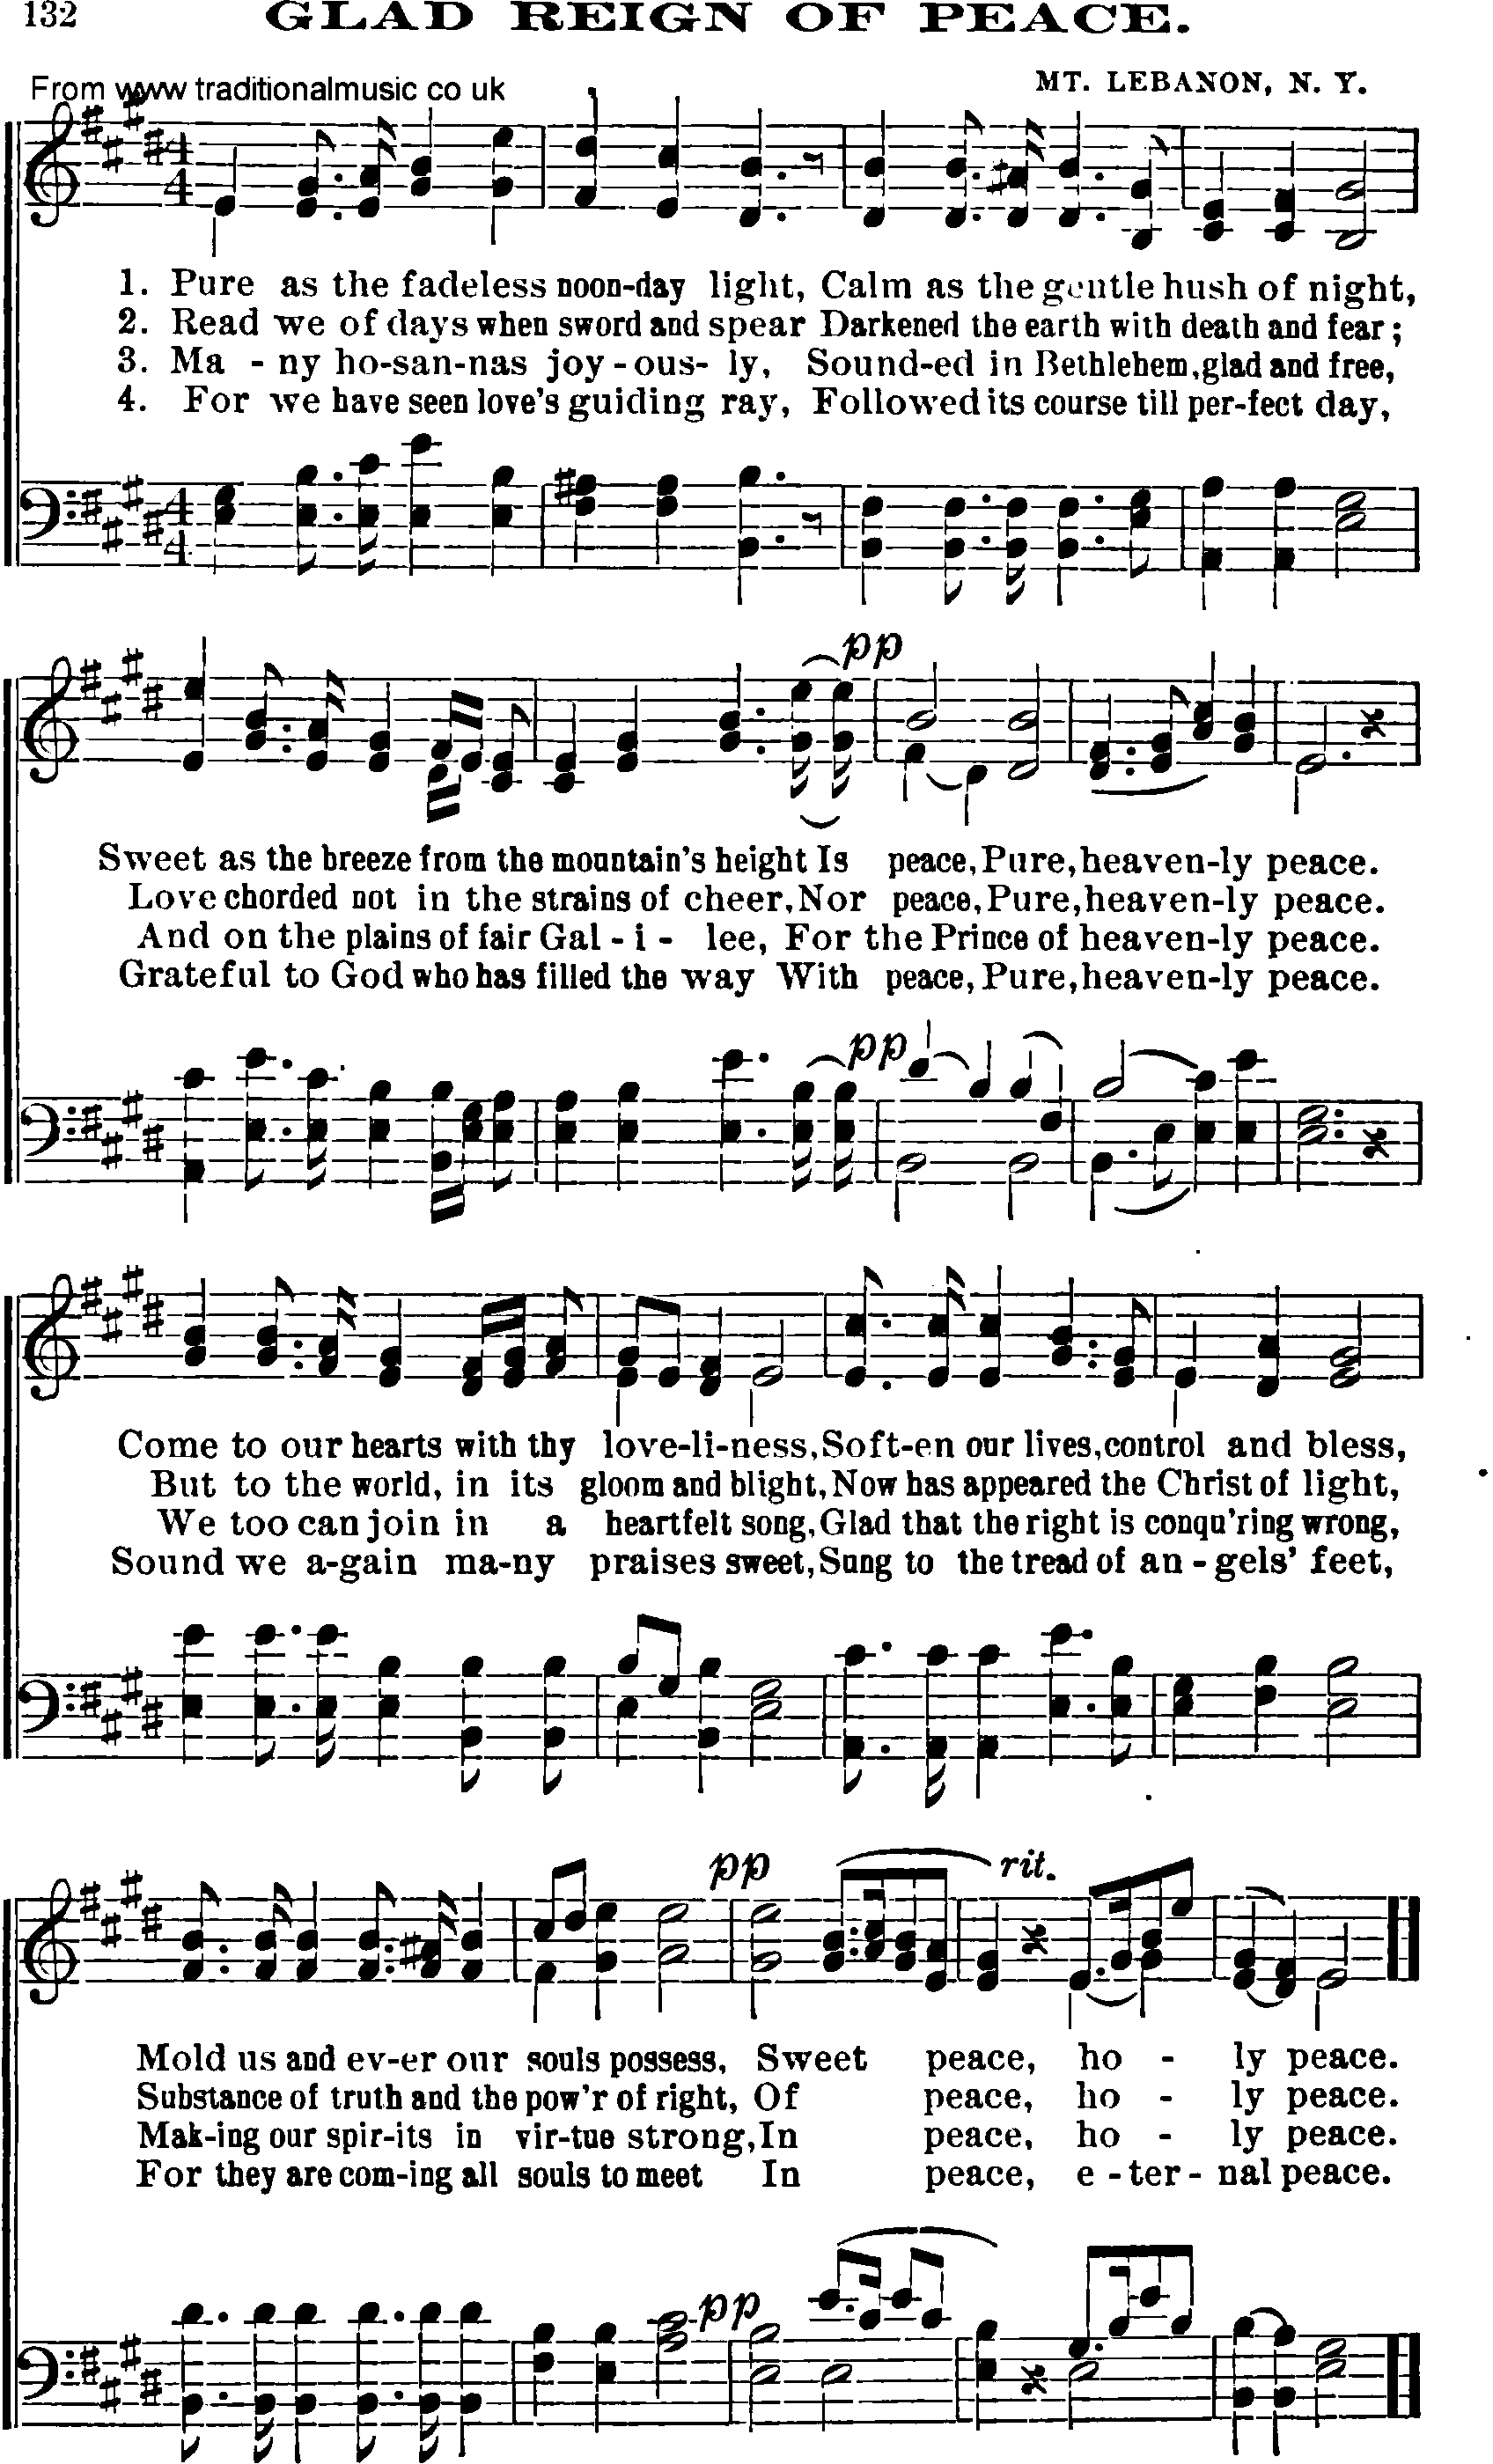 Shaker Music collection, Hymn: glad reign of peace, sheetmusic and PDF